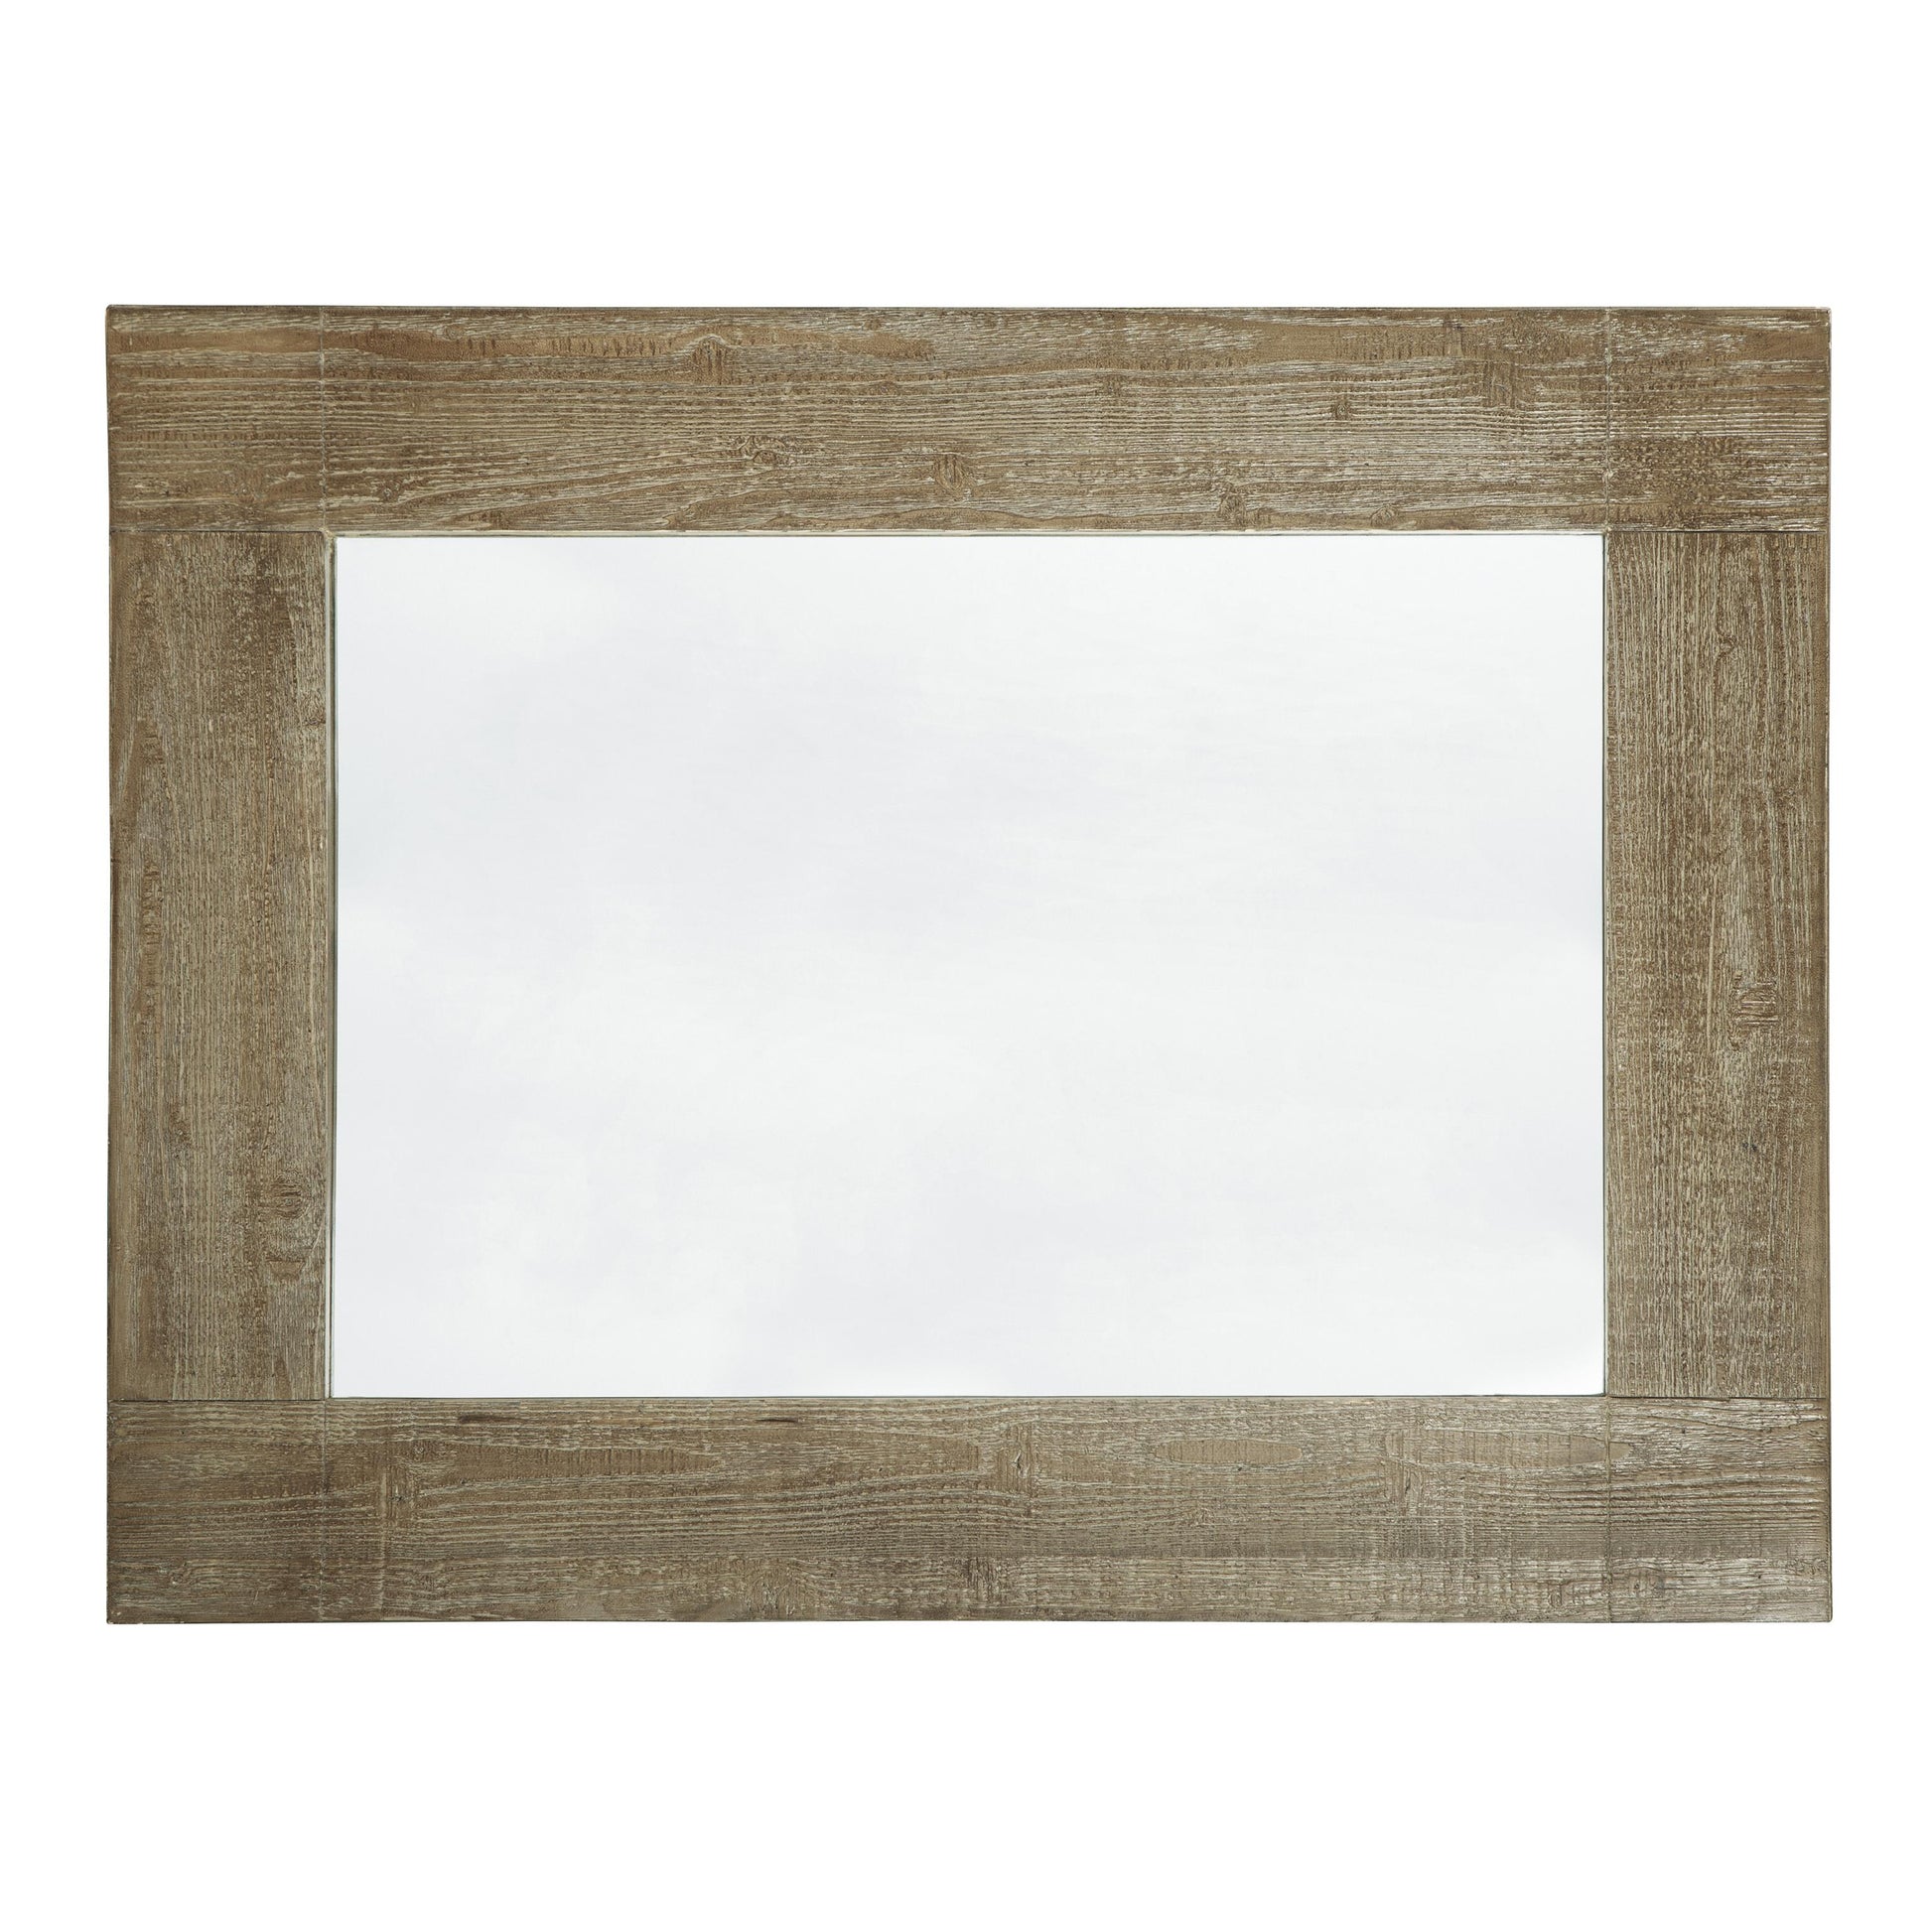 Signature Design by Ashley Waltleigh Wall Mirror A8010277 IMAGE 3